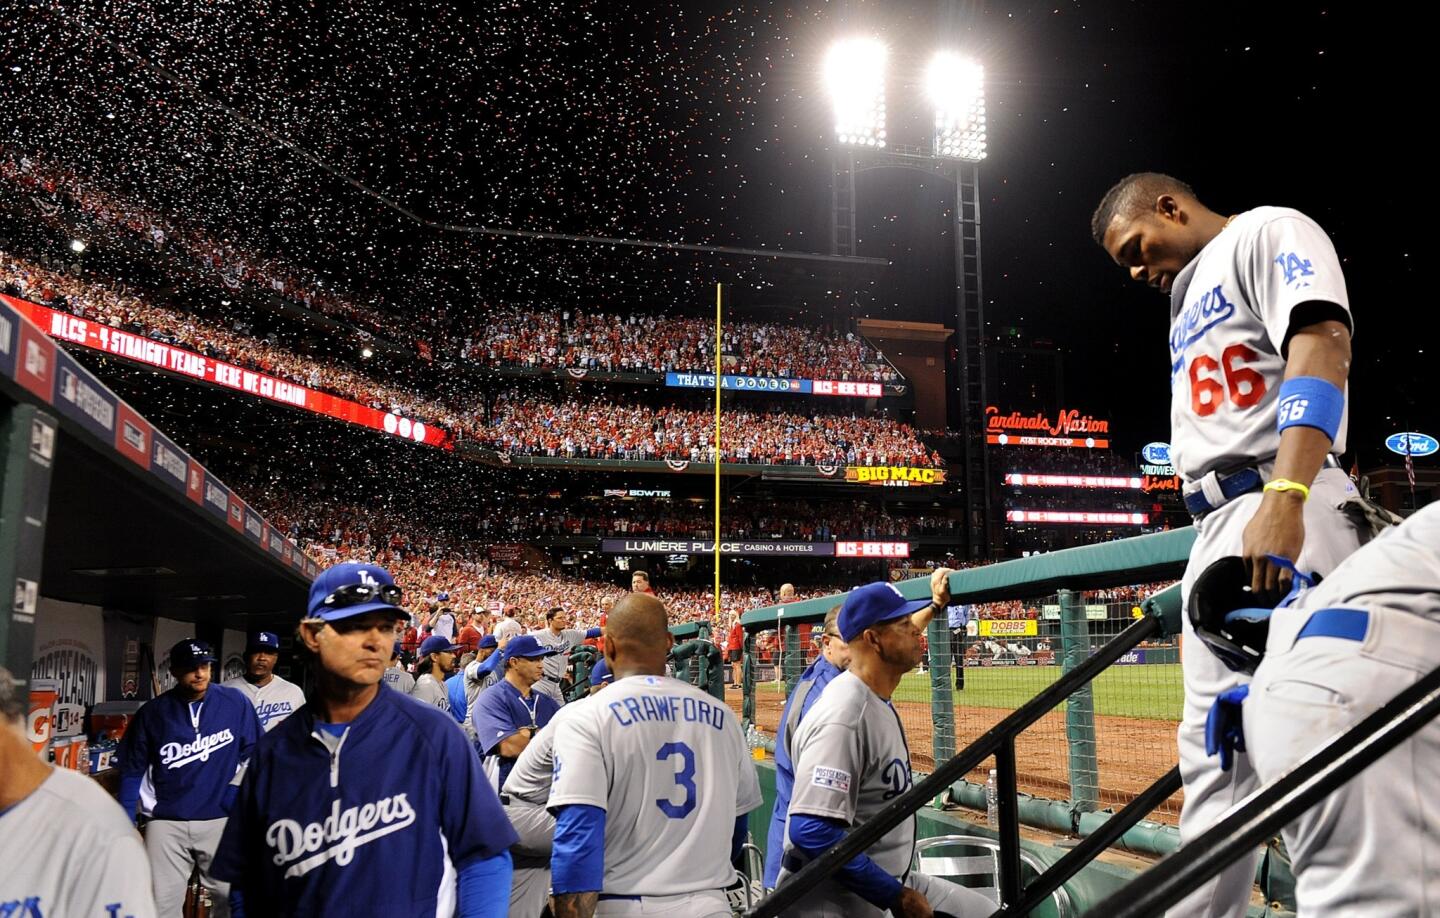 Yasiel Puig walks into the dugout after the Dodgers were eliminated from the postseason Tuesday by the St. Louis Cardinals in Game 4 of the National League Division Series.